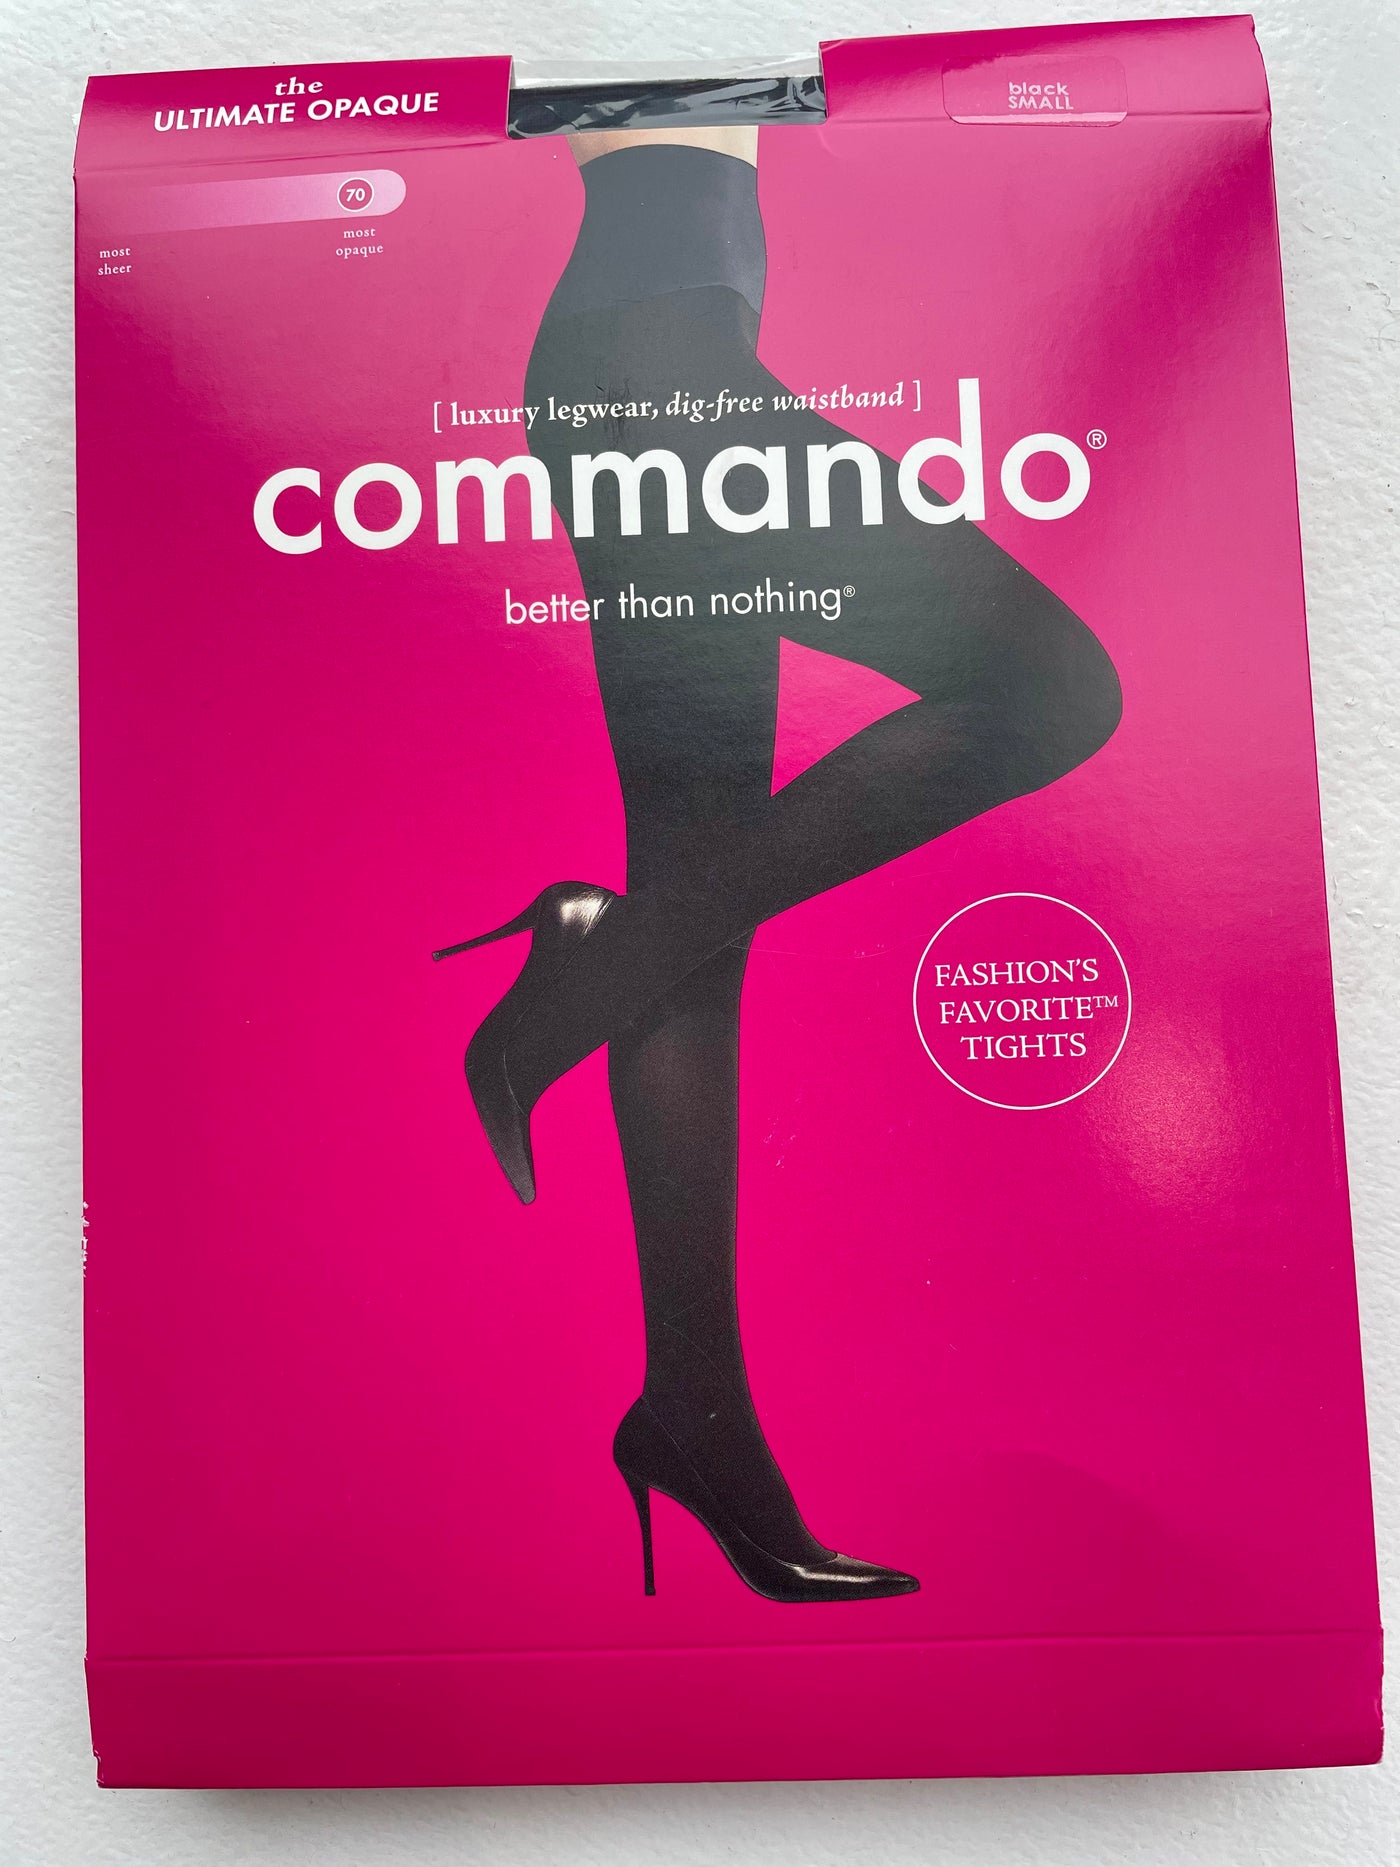 Commando brand opaque black tights that feel luxurious, comfortable, and with a supportive waistband. A woman run brand from New England.